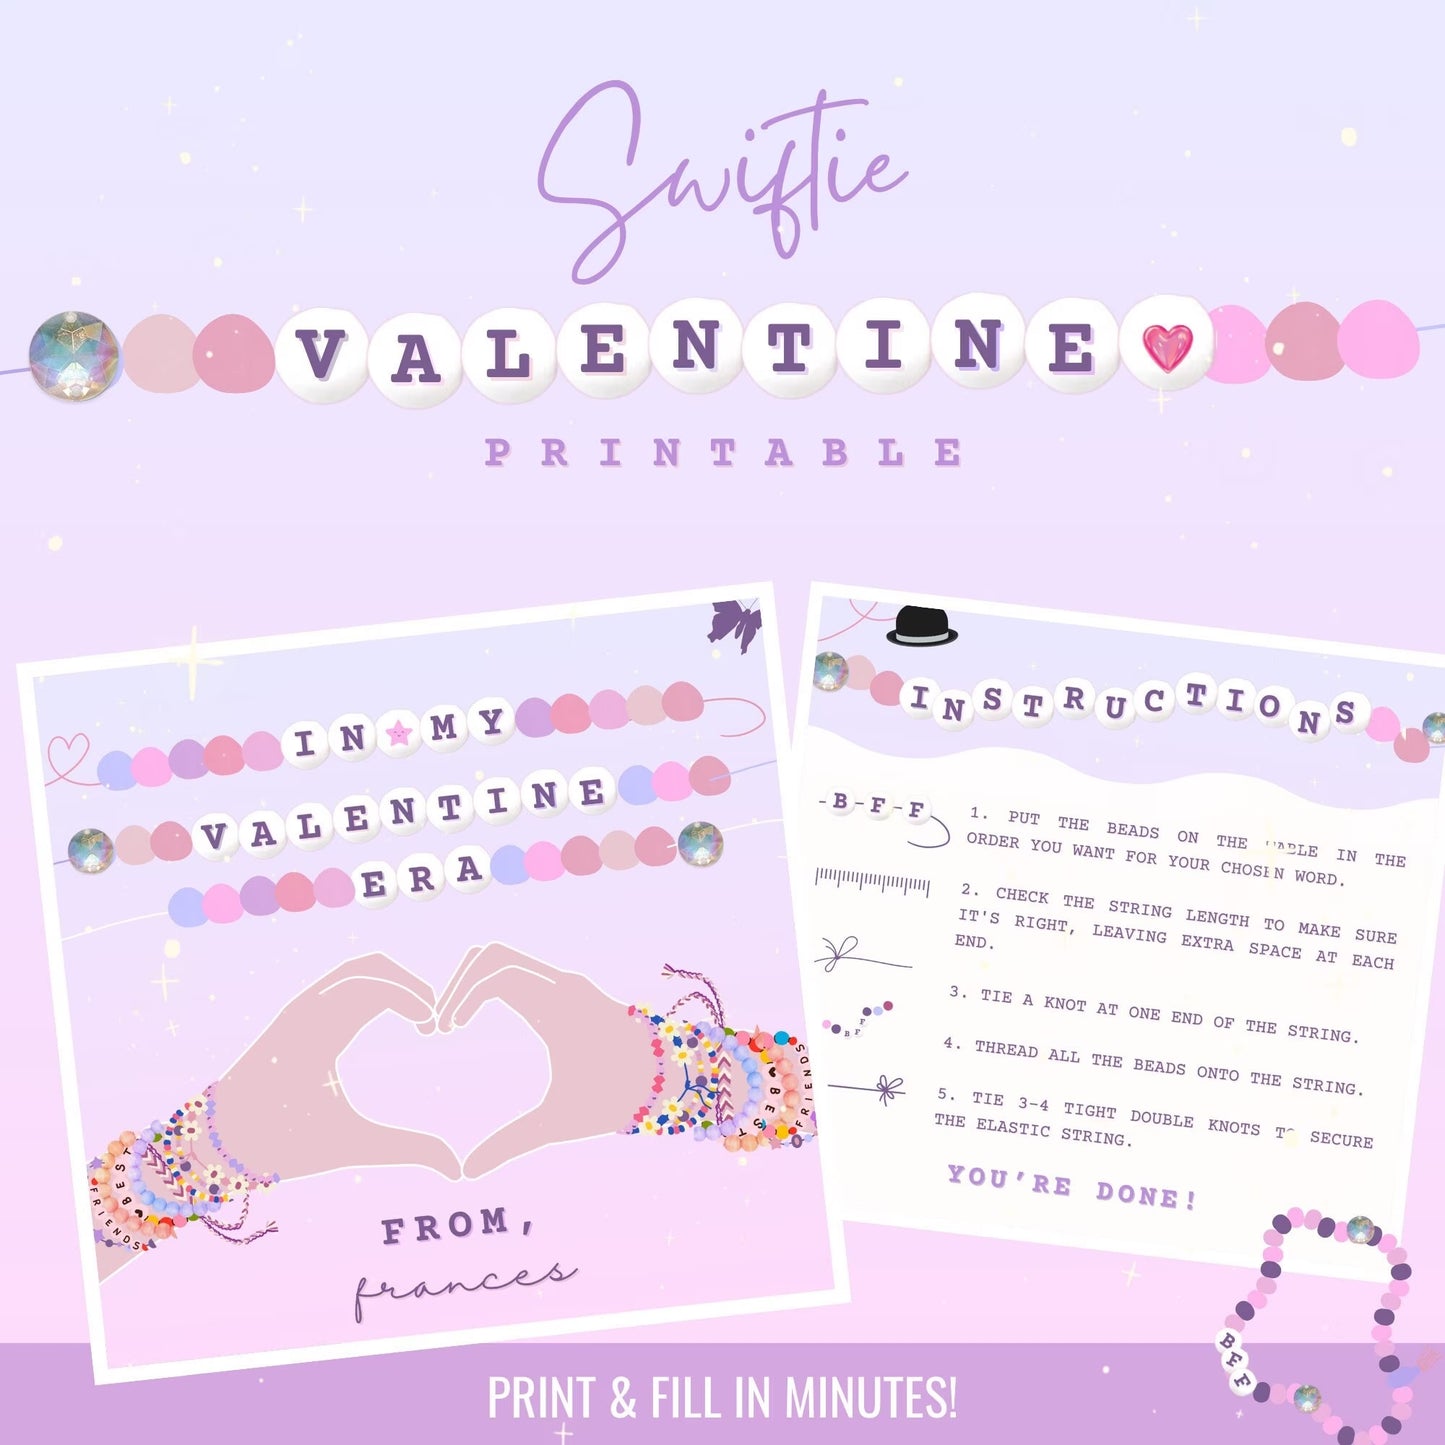 Taylor Swift Valentines Day Printable